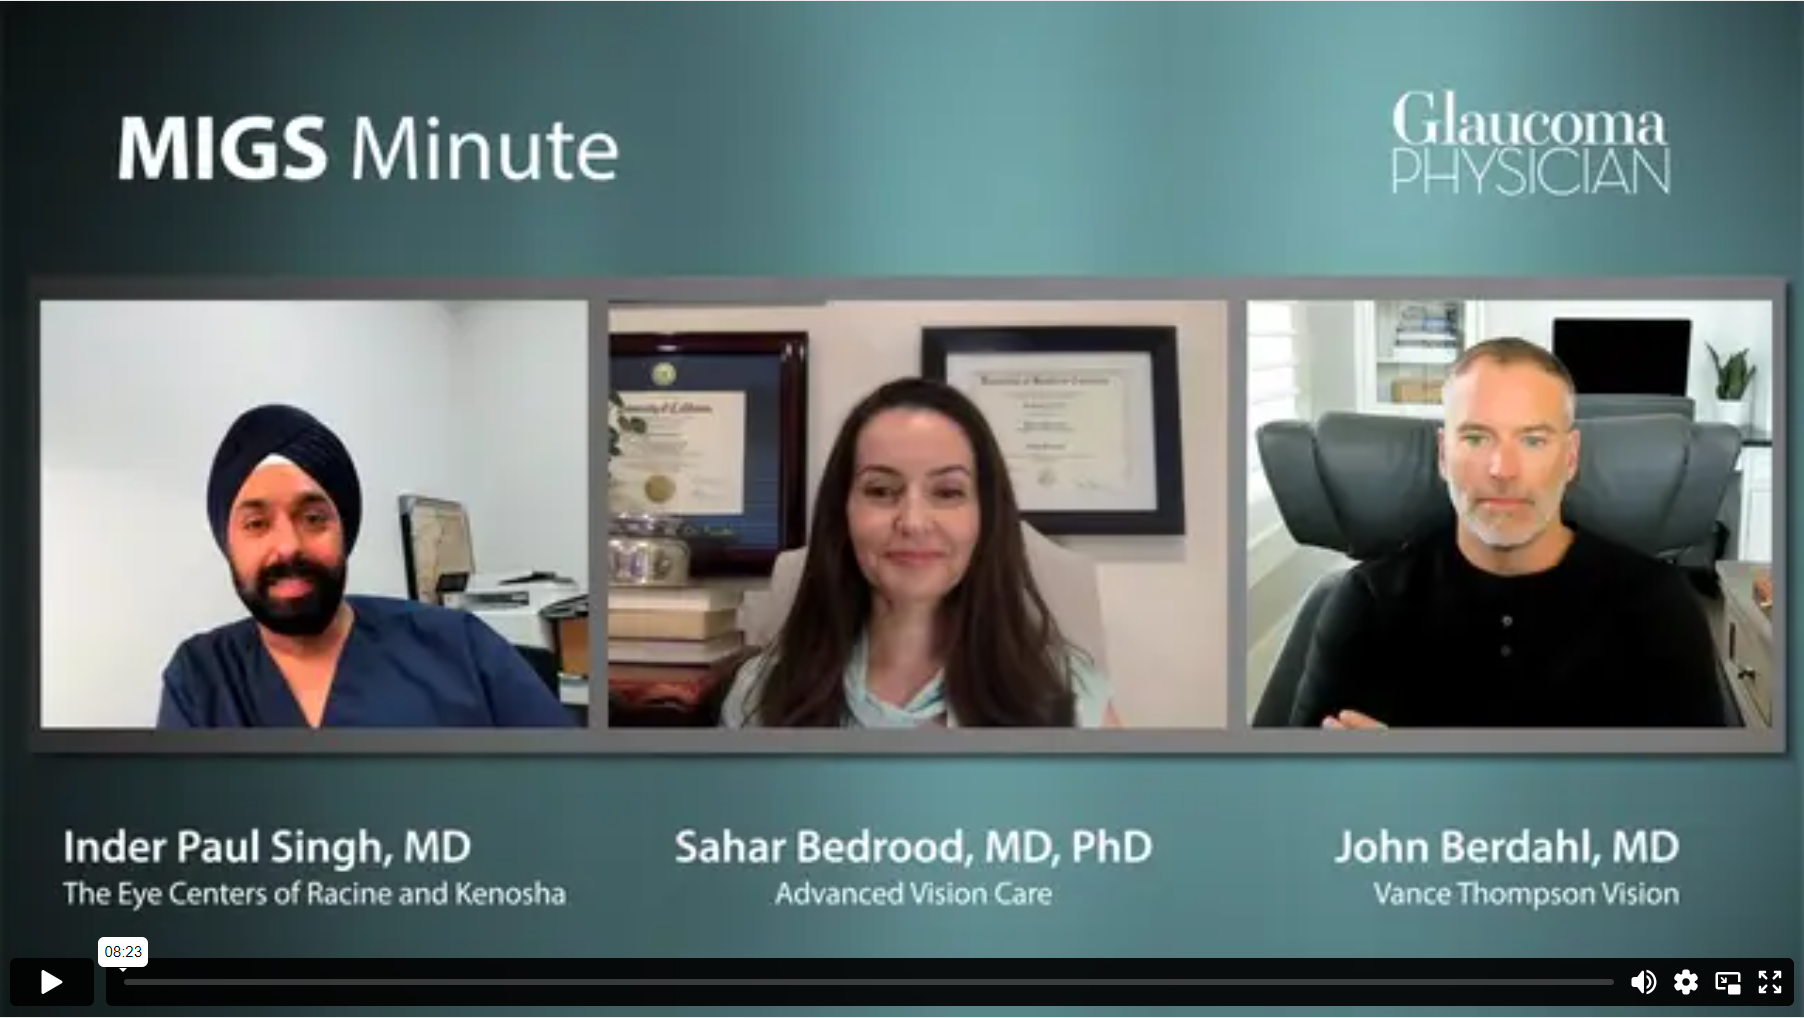 Episode 10: Inder Paul Singh, MD, Sahar Bedrood, MD, PhD, and John Berdahl, MD discuss maximum tolerated medical therapy